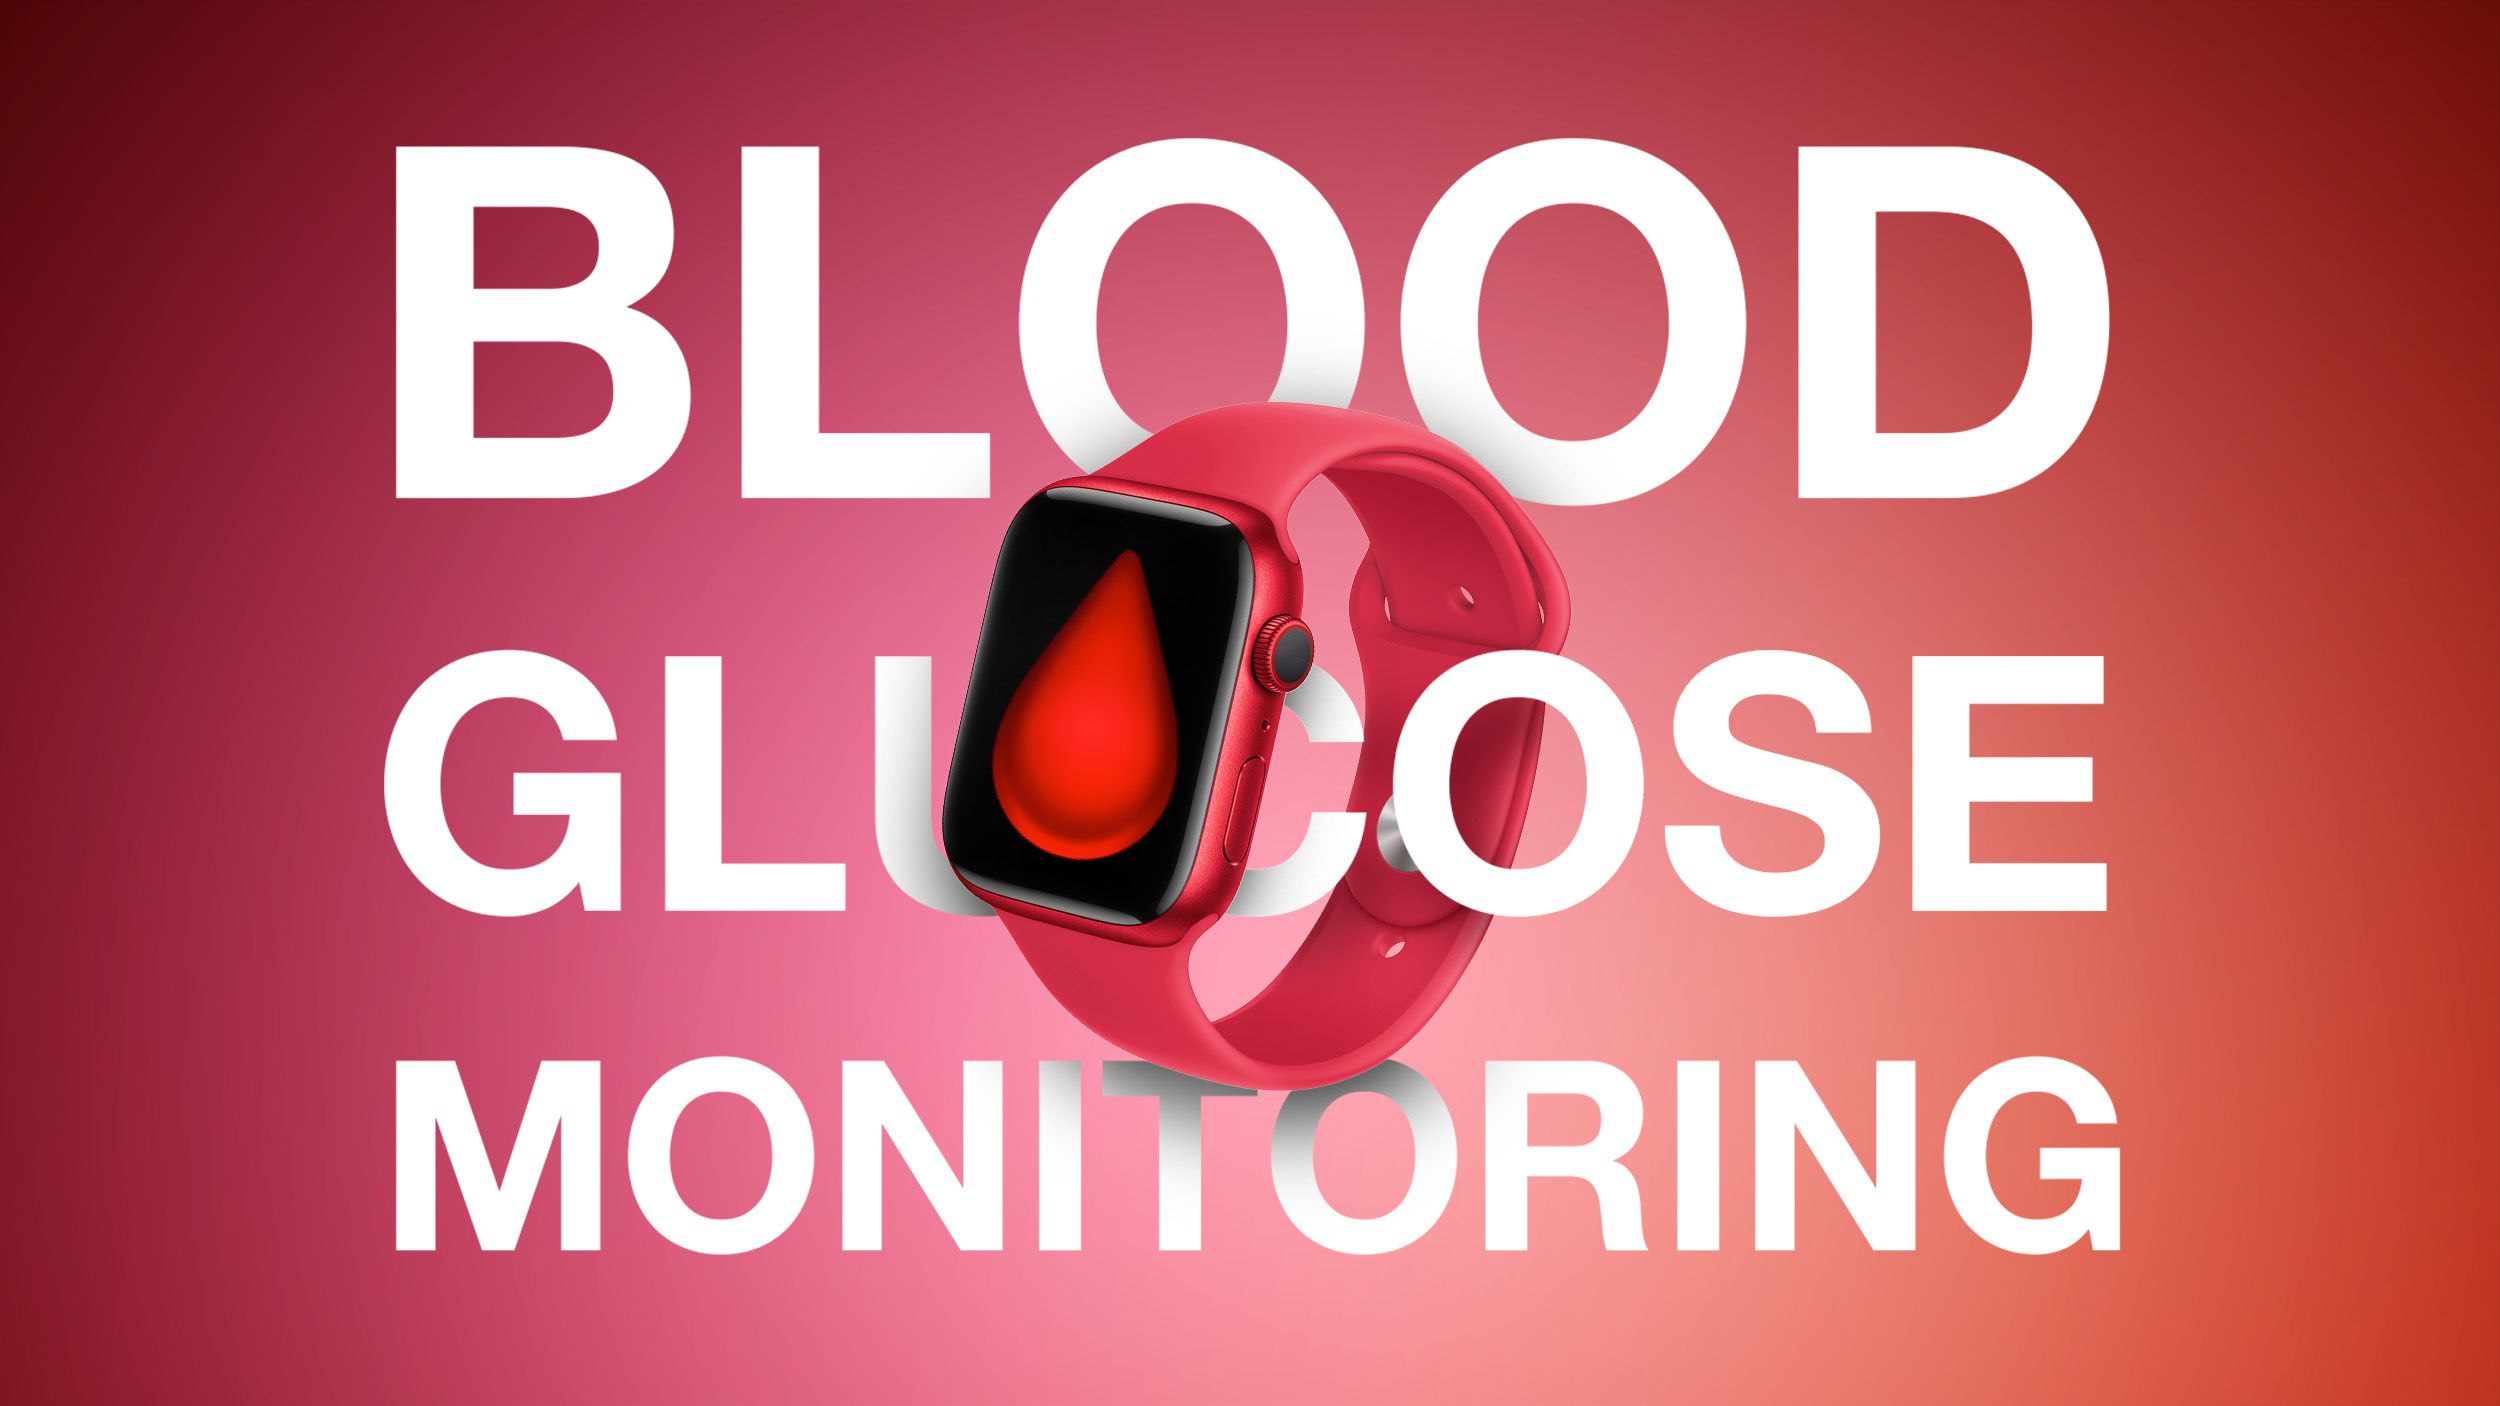 Apple Watch Blood Glucose Monitoring Likely Still 